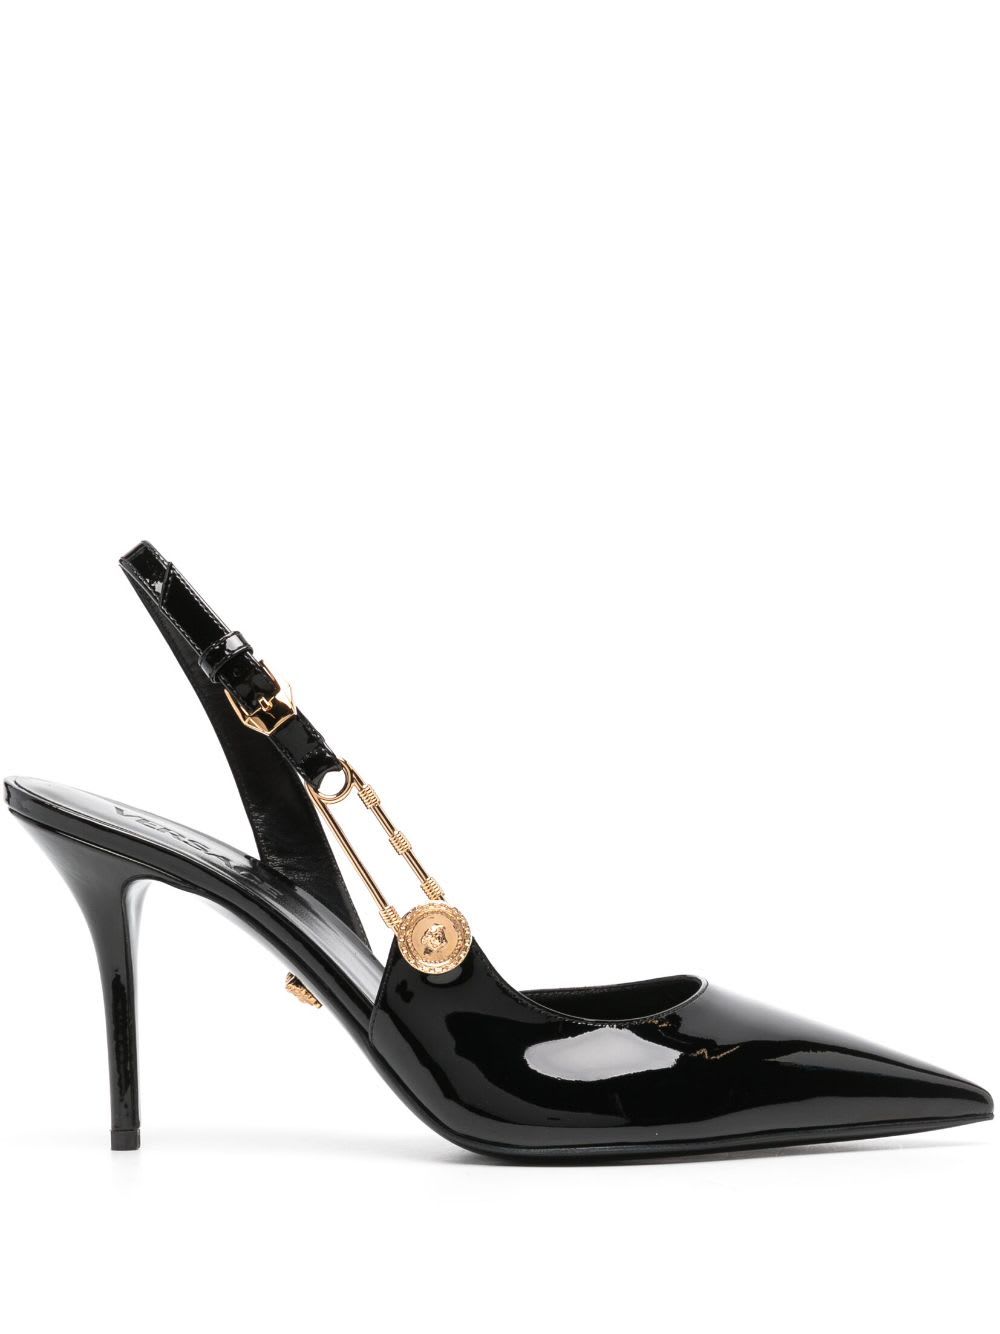 VERSACE SLING BACK CALF LEATHER